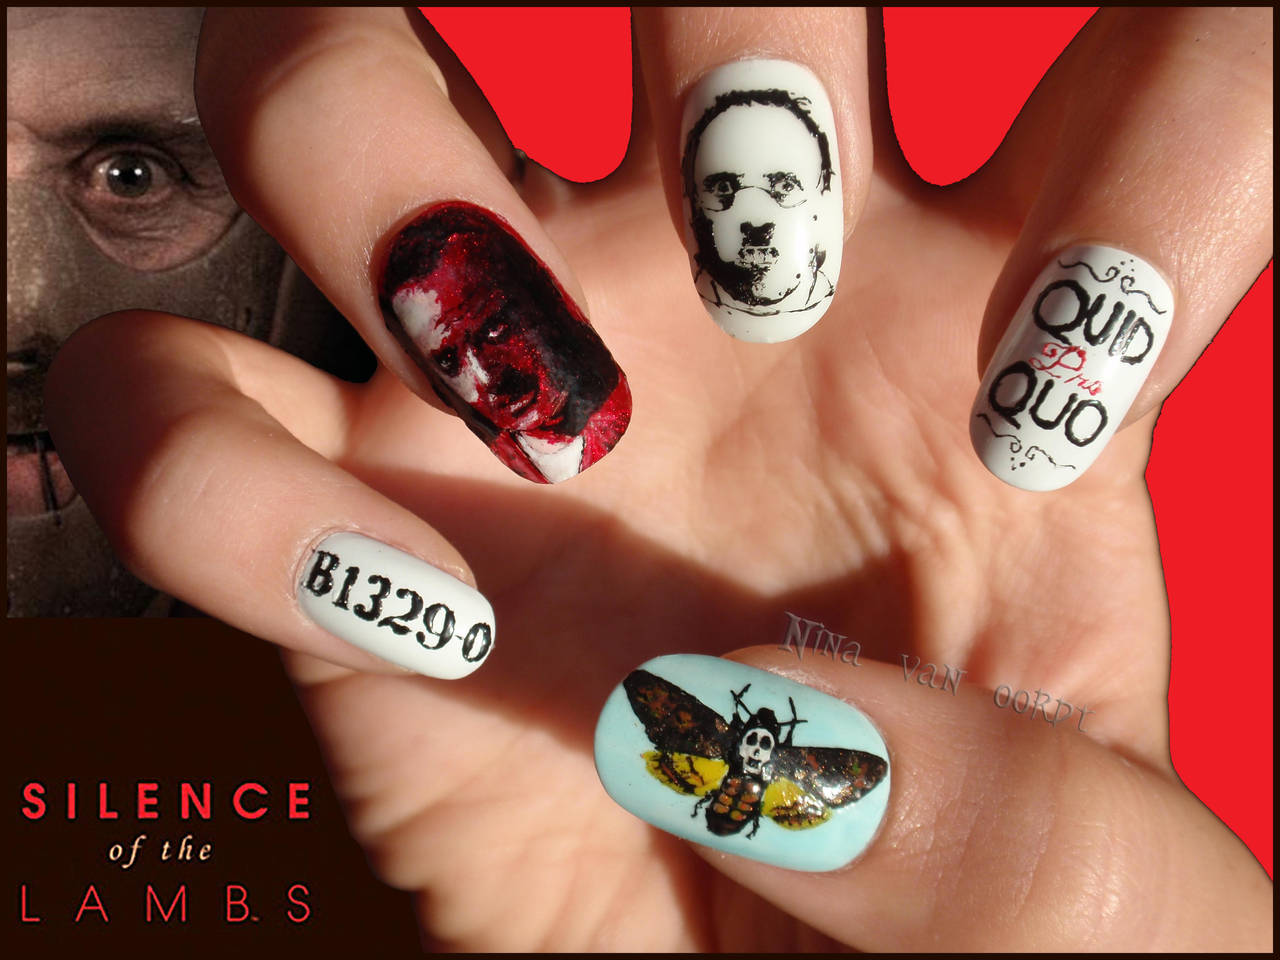 8. "The Silence of the Lambs" Nail Art - wide 4